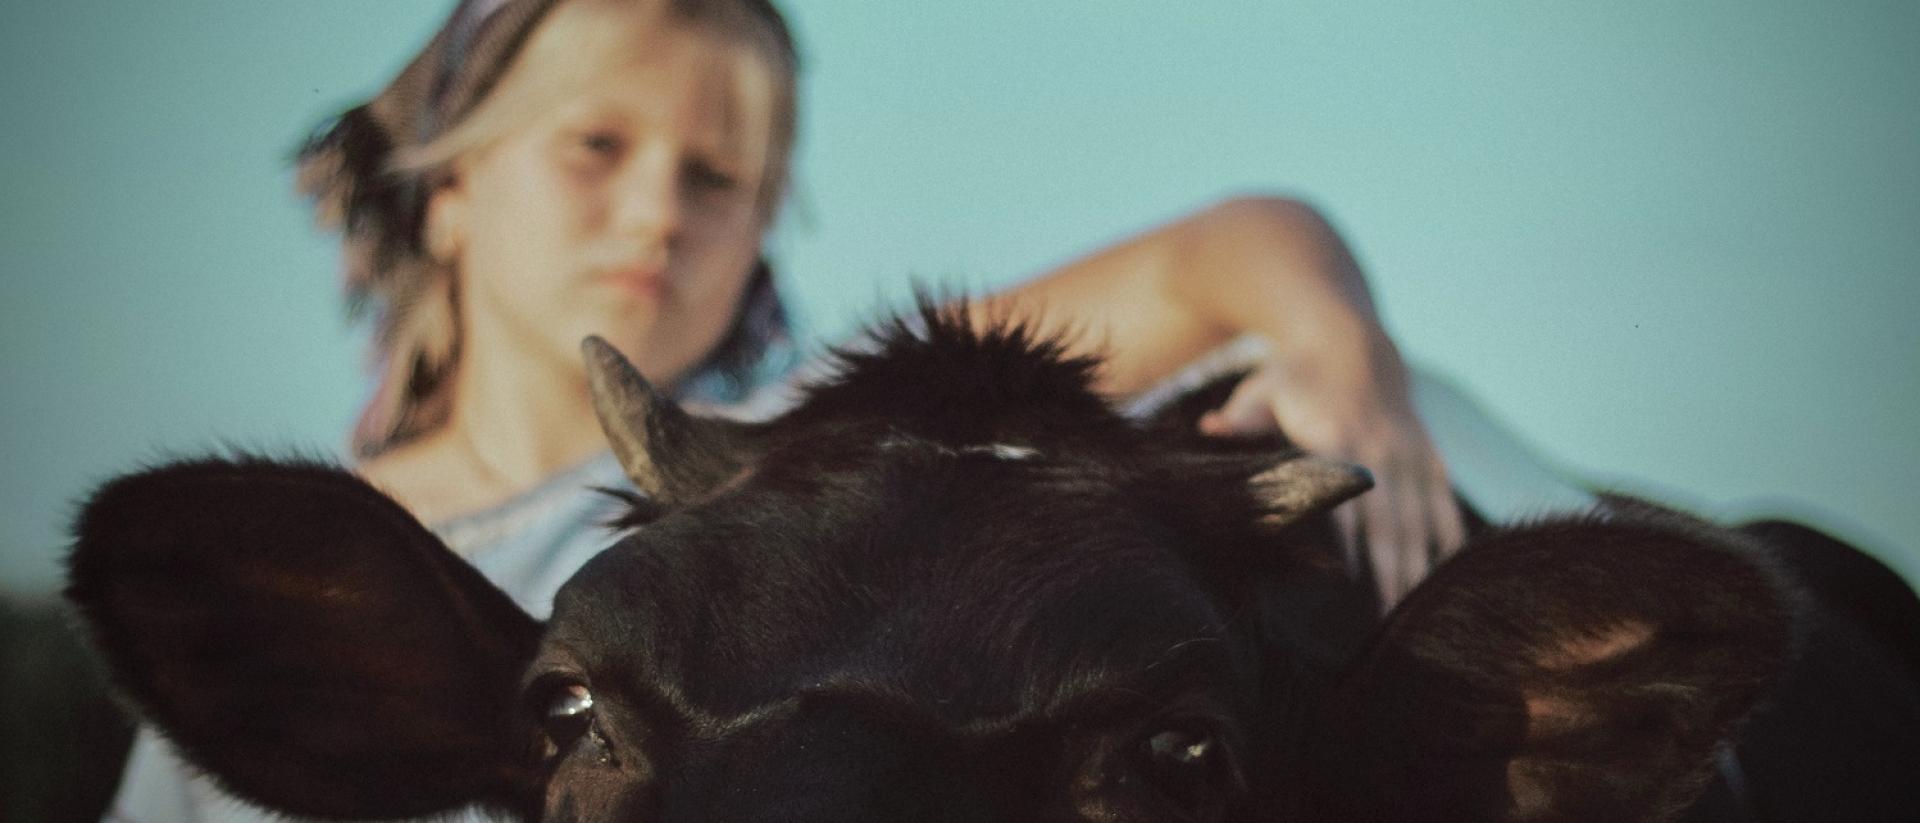 a photo of a young person standing behind a black cow